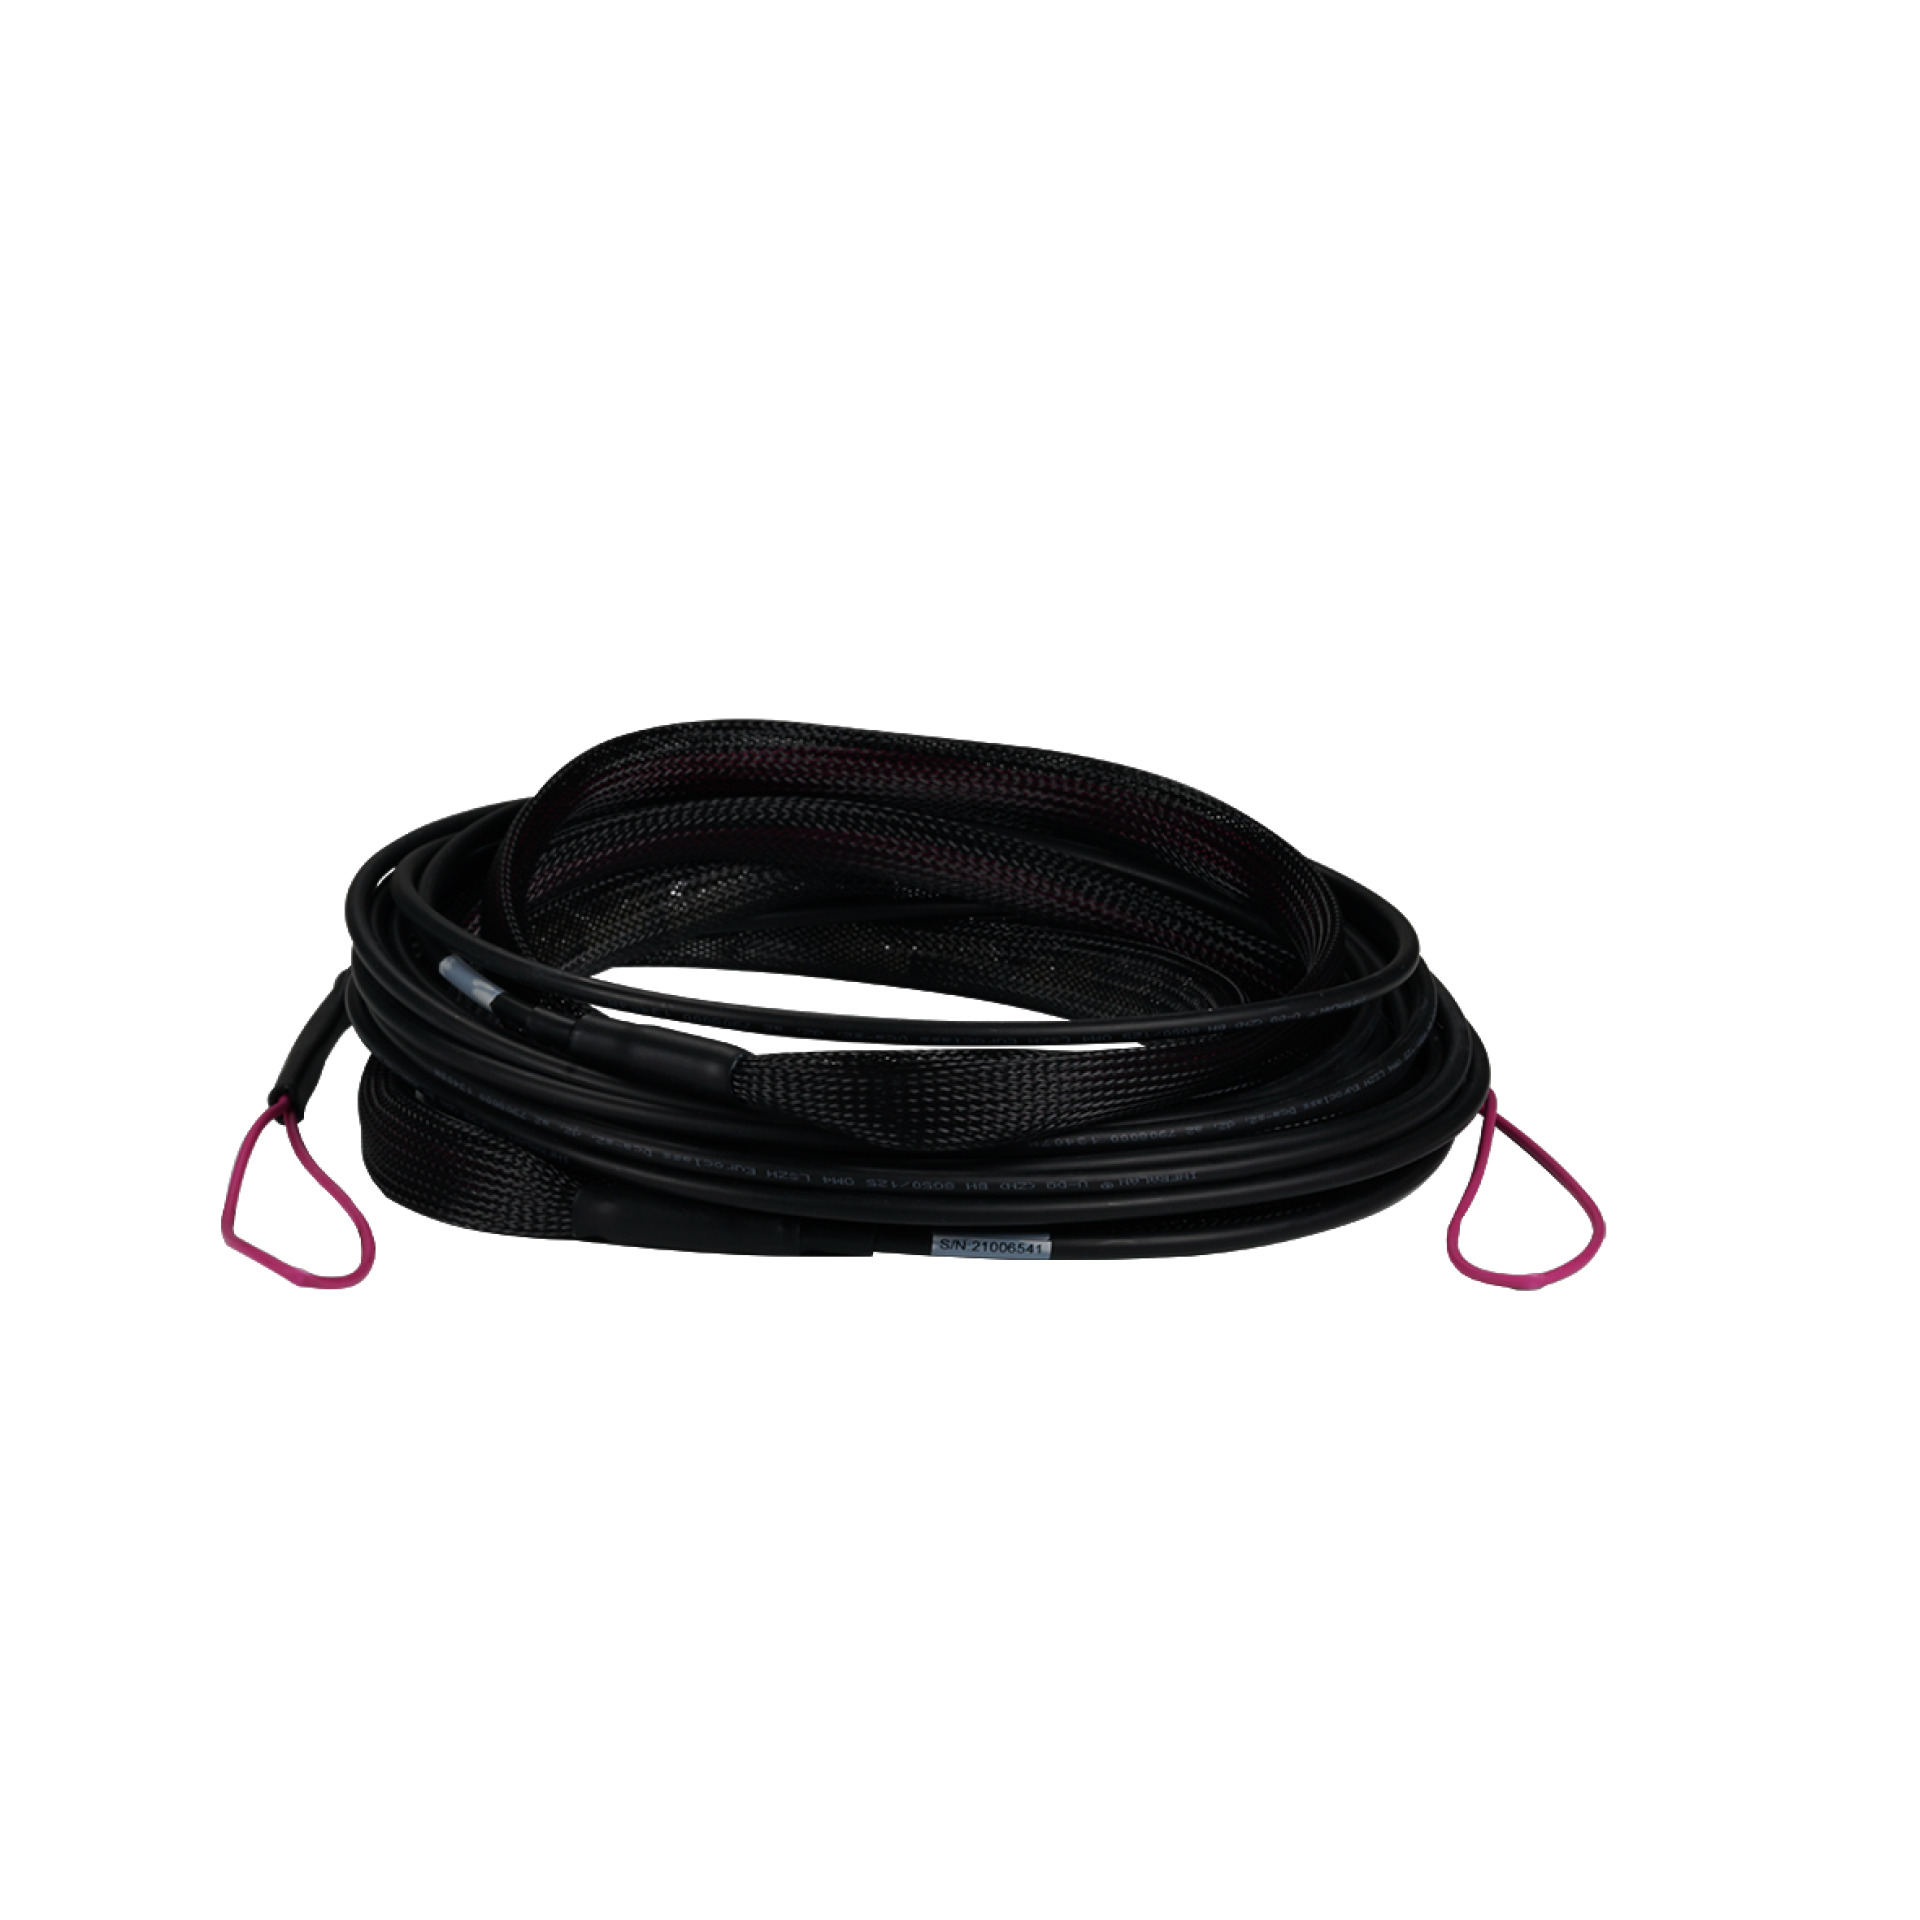 Trunk cable U-DQ(ZN)BH 12G 50/125, SC/SC OM4 150m